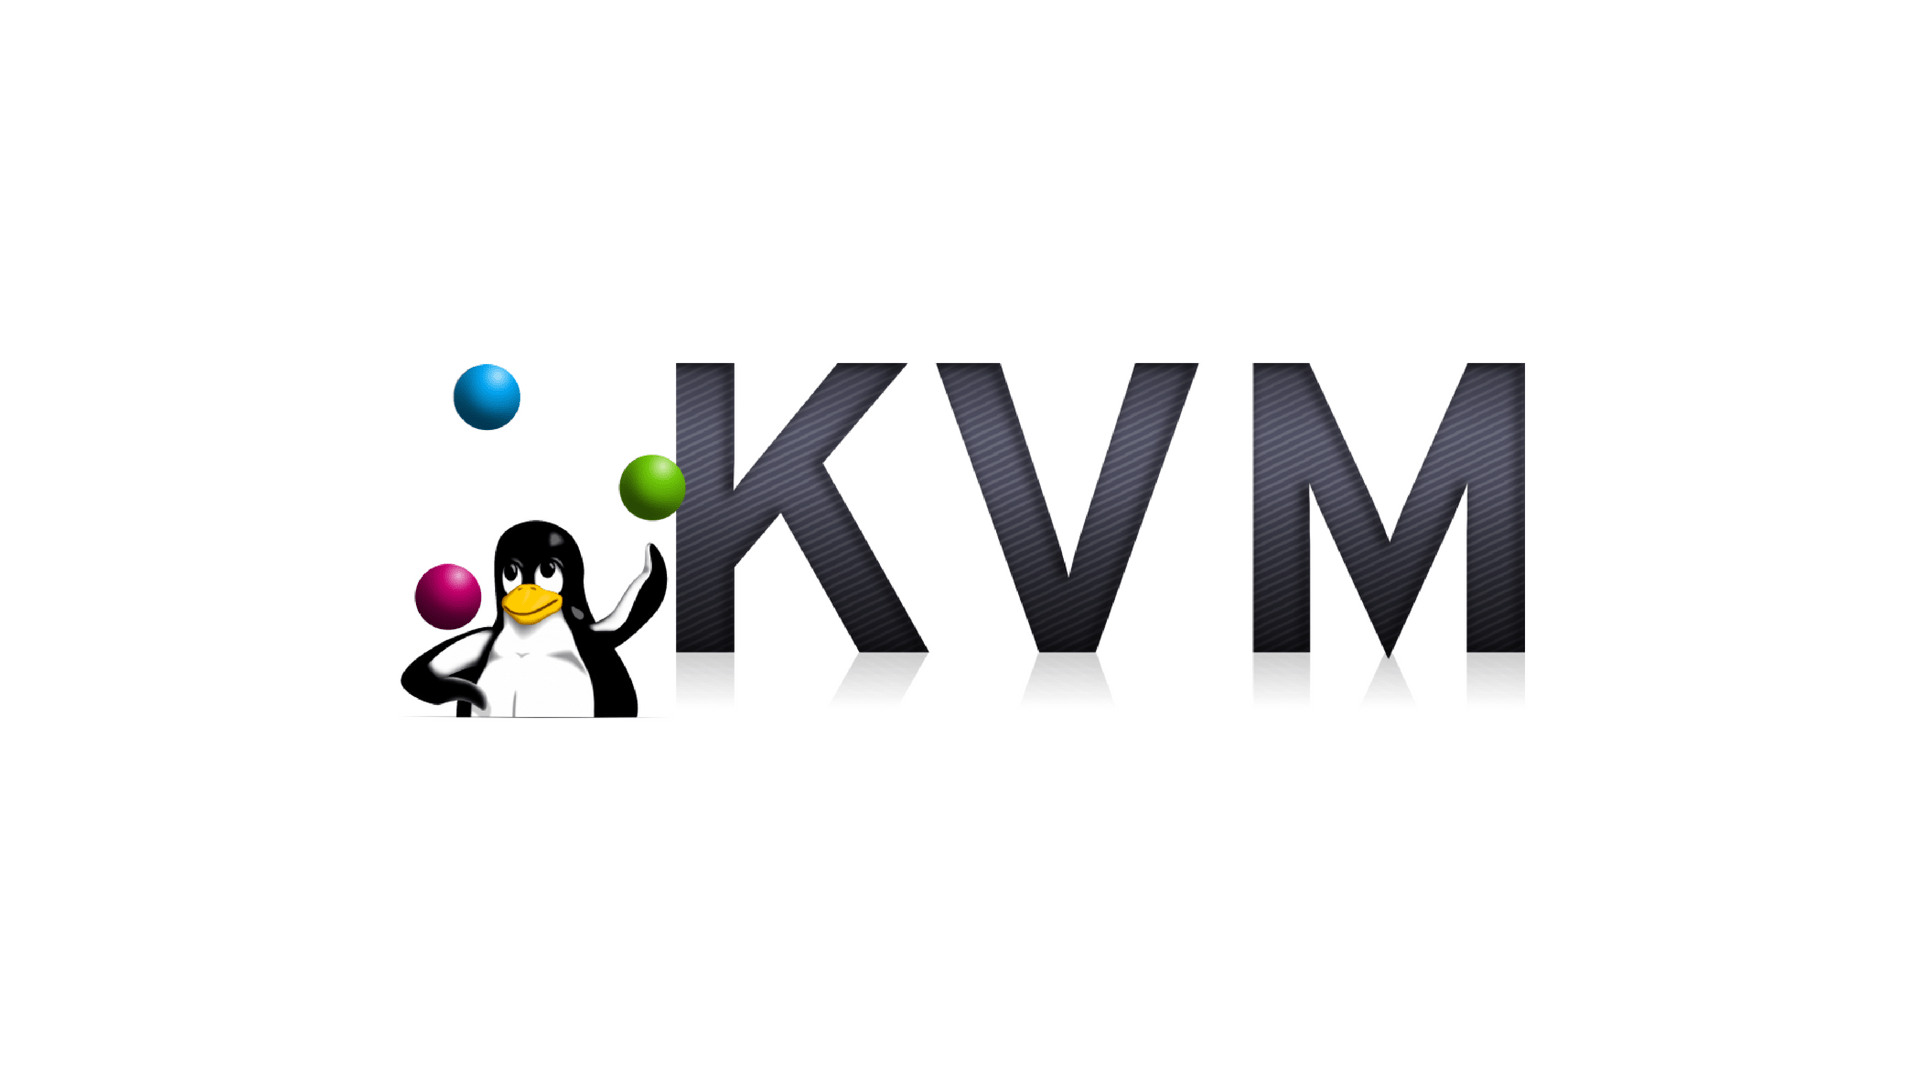 What Is the Difference between QEMU and KVM?